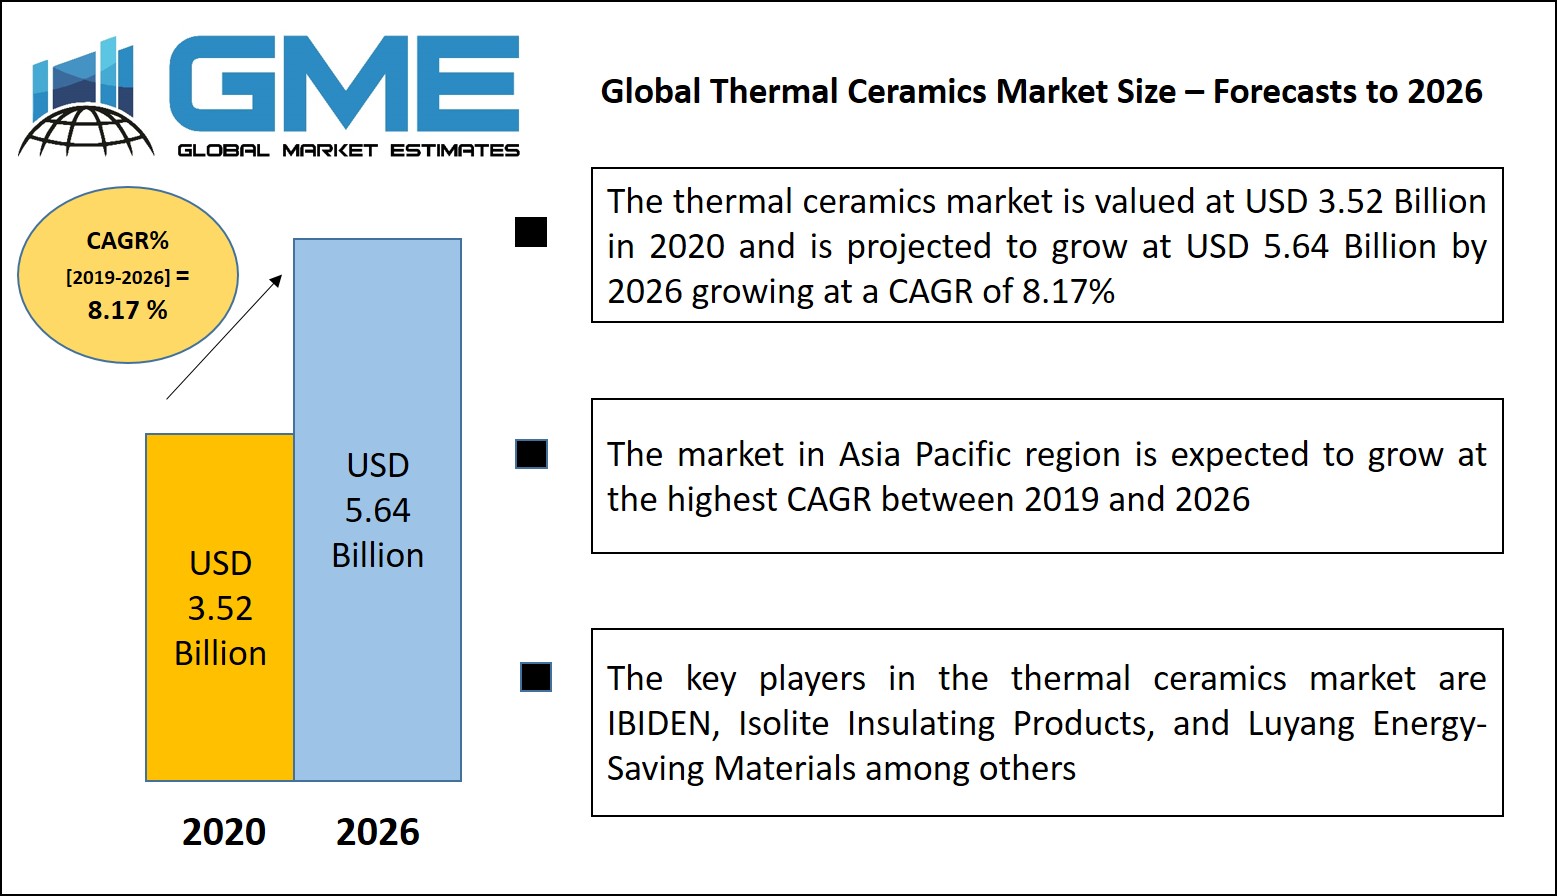 Global Thermal Ceramics Market Size – Forecasts to 2026